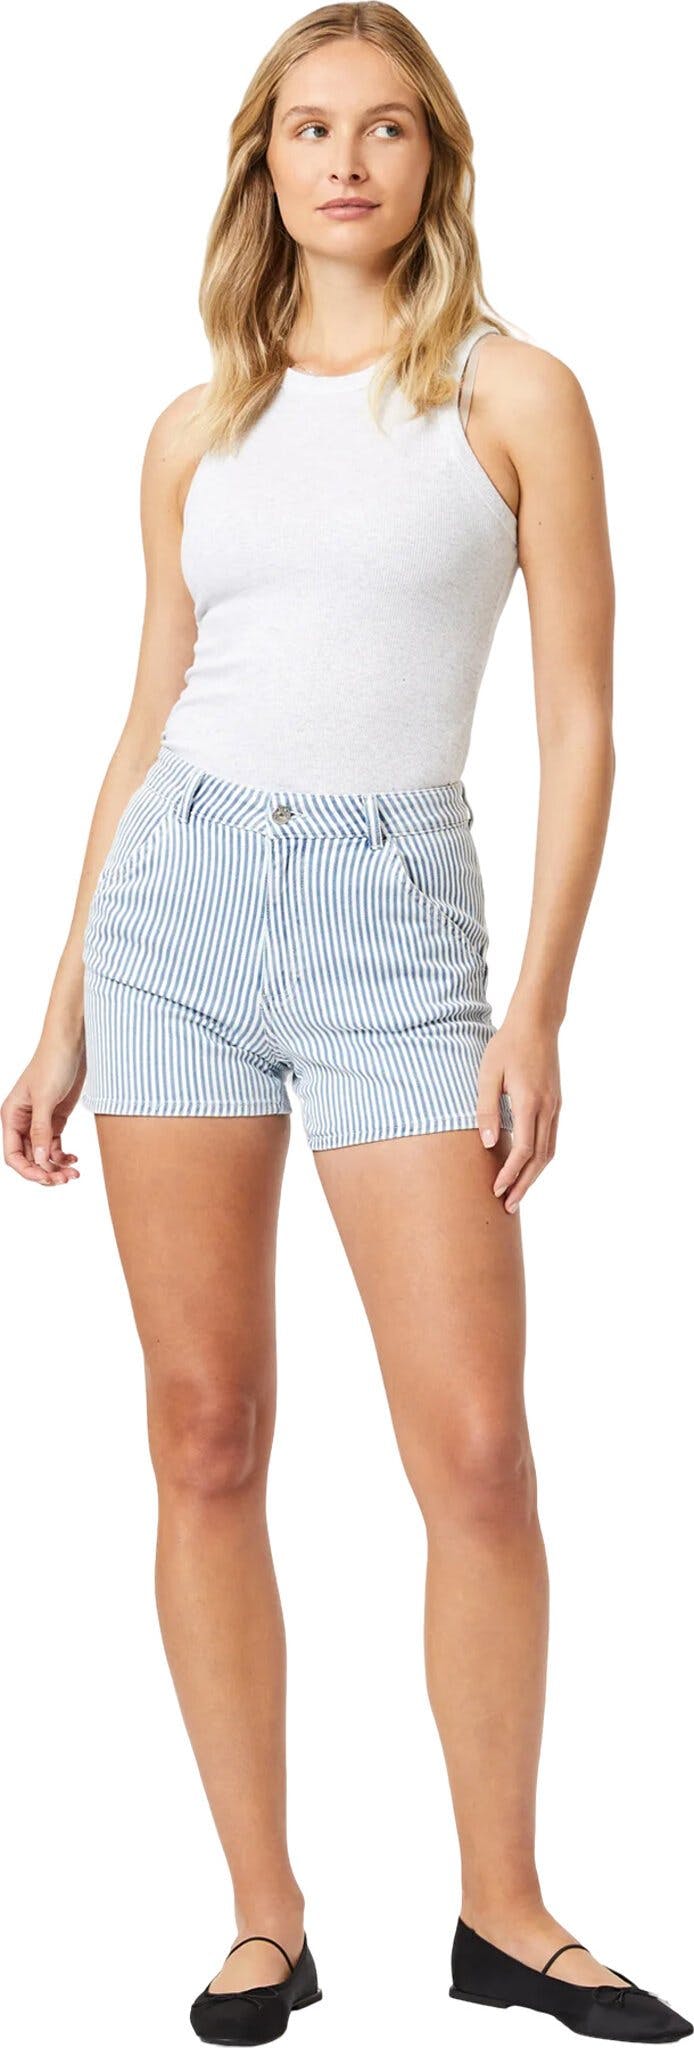 Product image for Kylie Utility Shorts - Women's